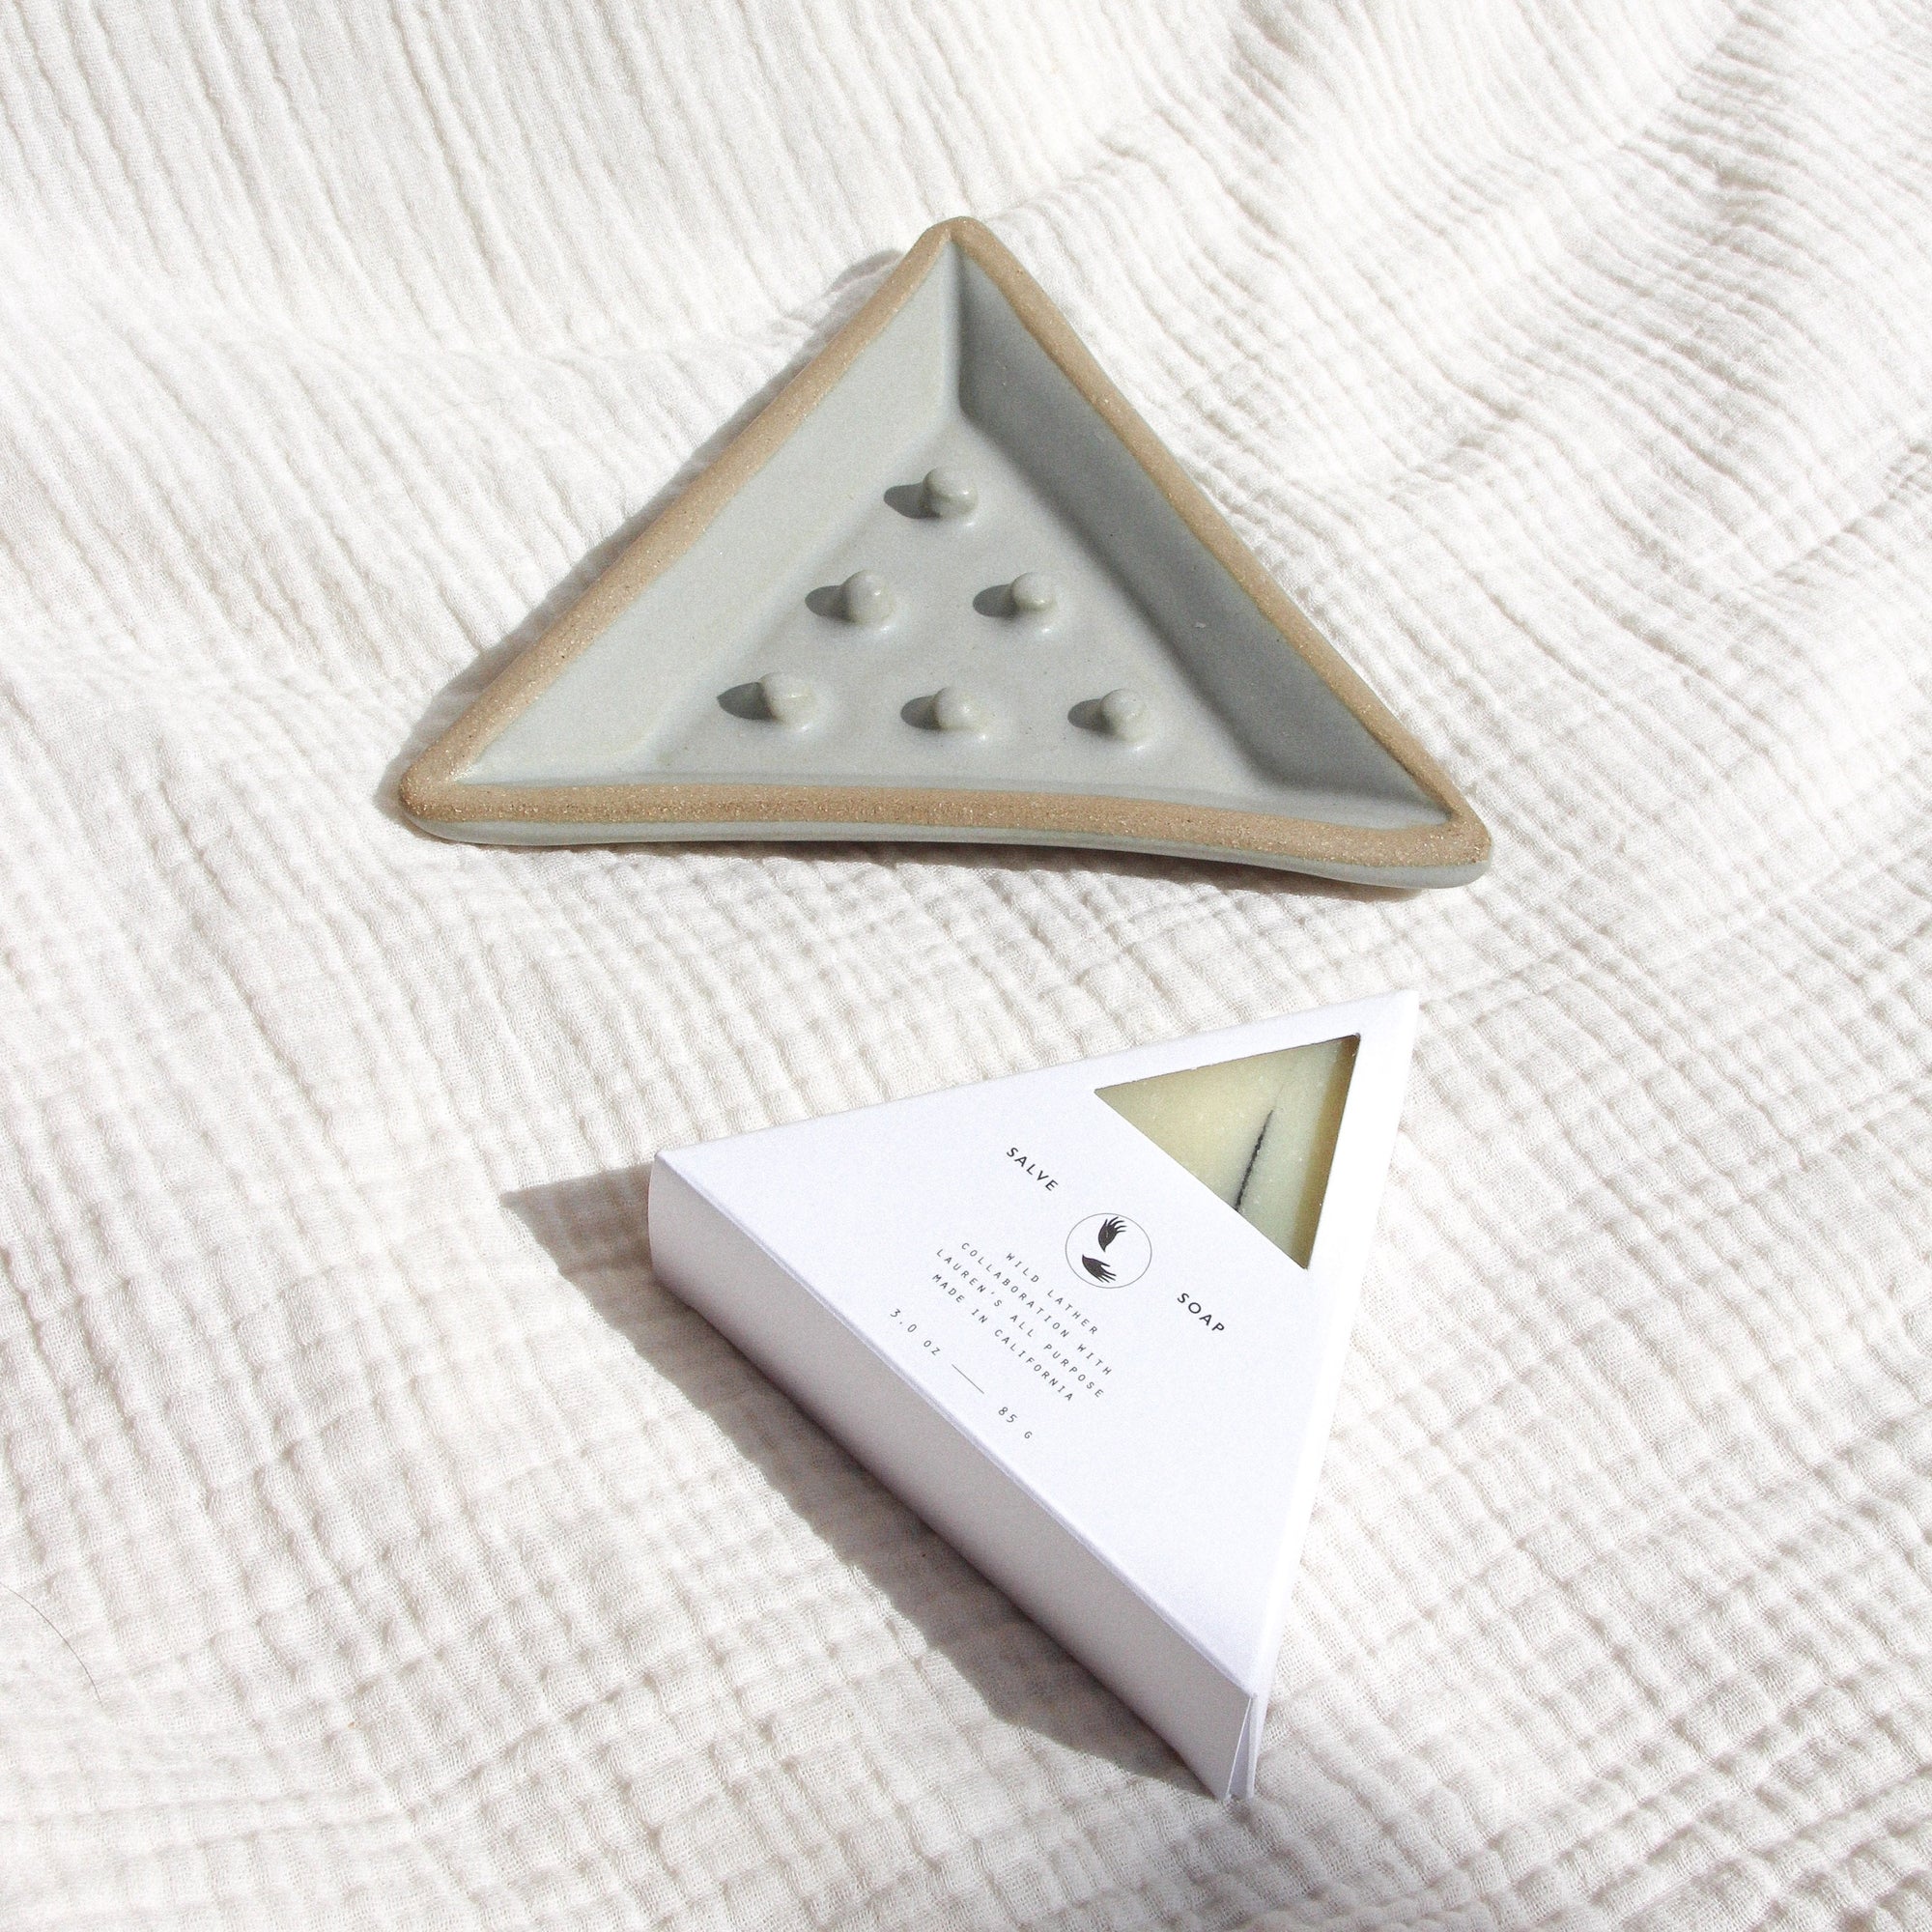 A triangular soap dish and packaged triangle soap against textured linen